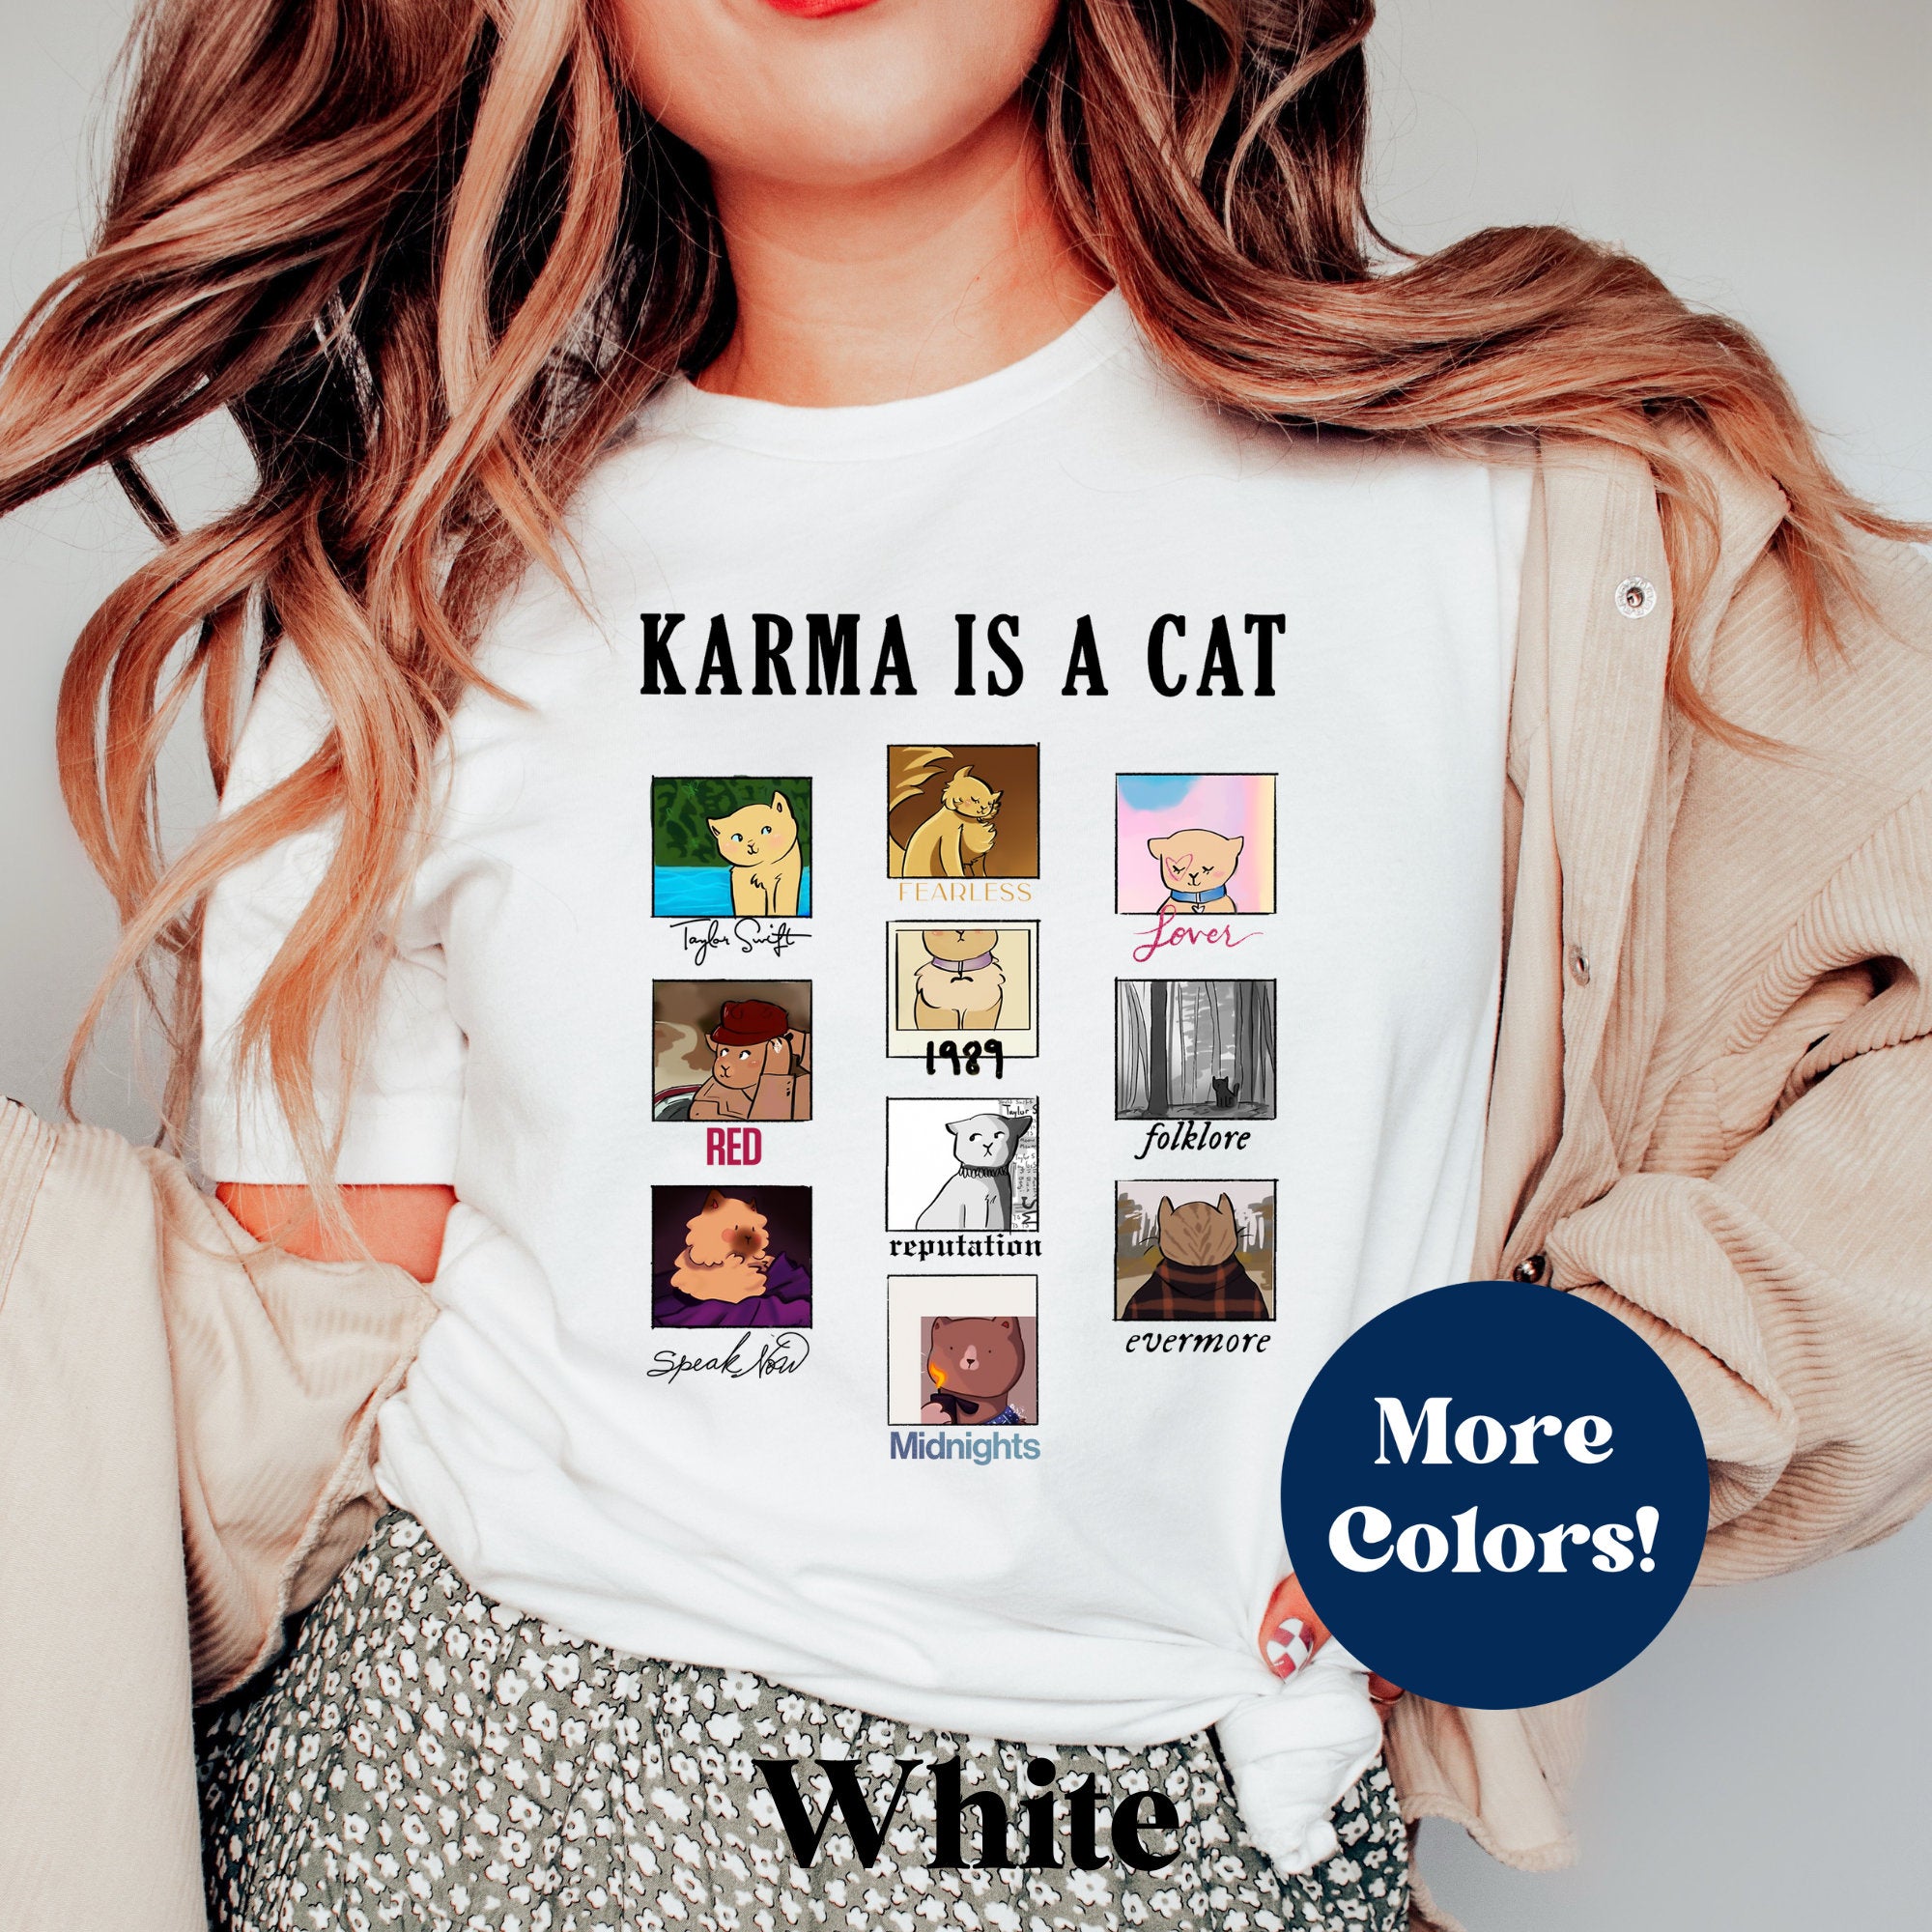 Karma is a Cat Album Covers T Shirt Taylor Swift T-Shirt Taylor